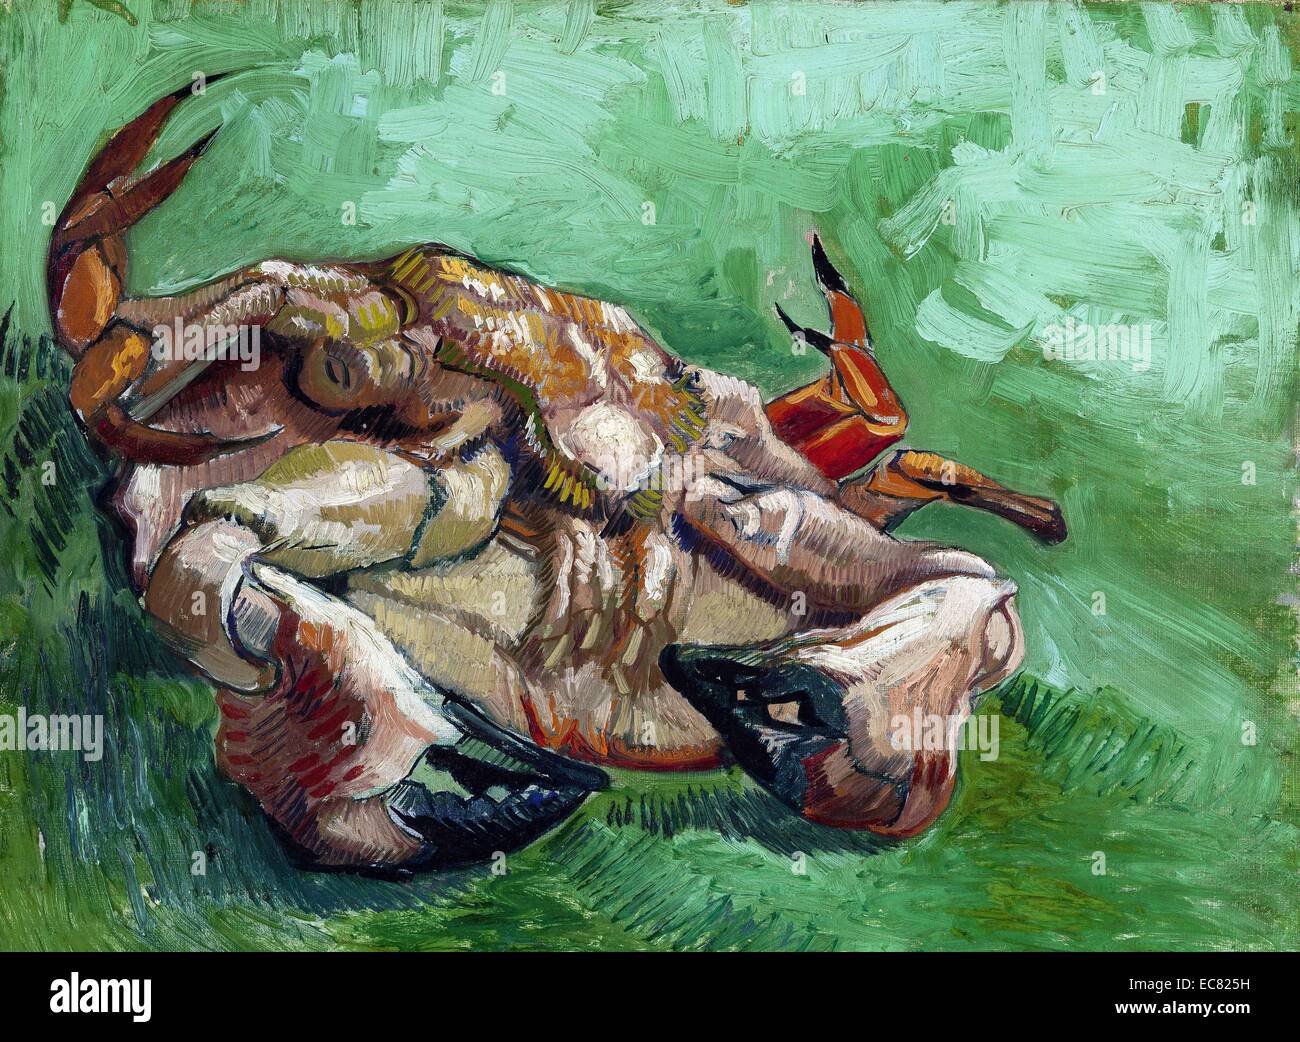 Painting titled 'A Crab' by Vincent van Gogh (1853-1890)  post-Impressionist painter of Dutch origin. Dated 1888 Stock Photo